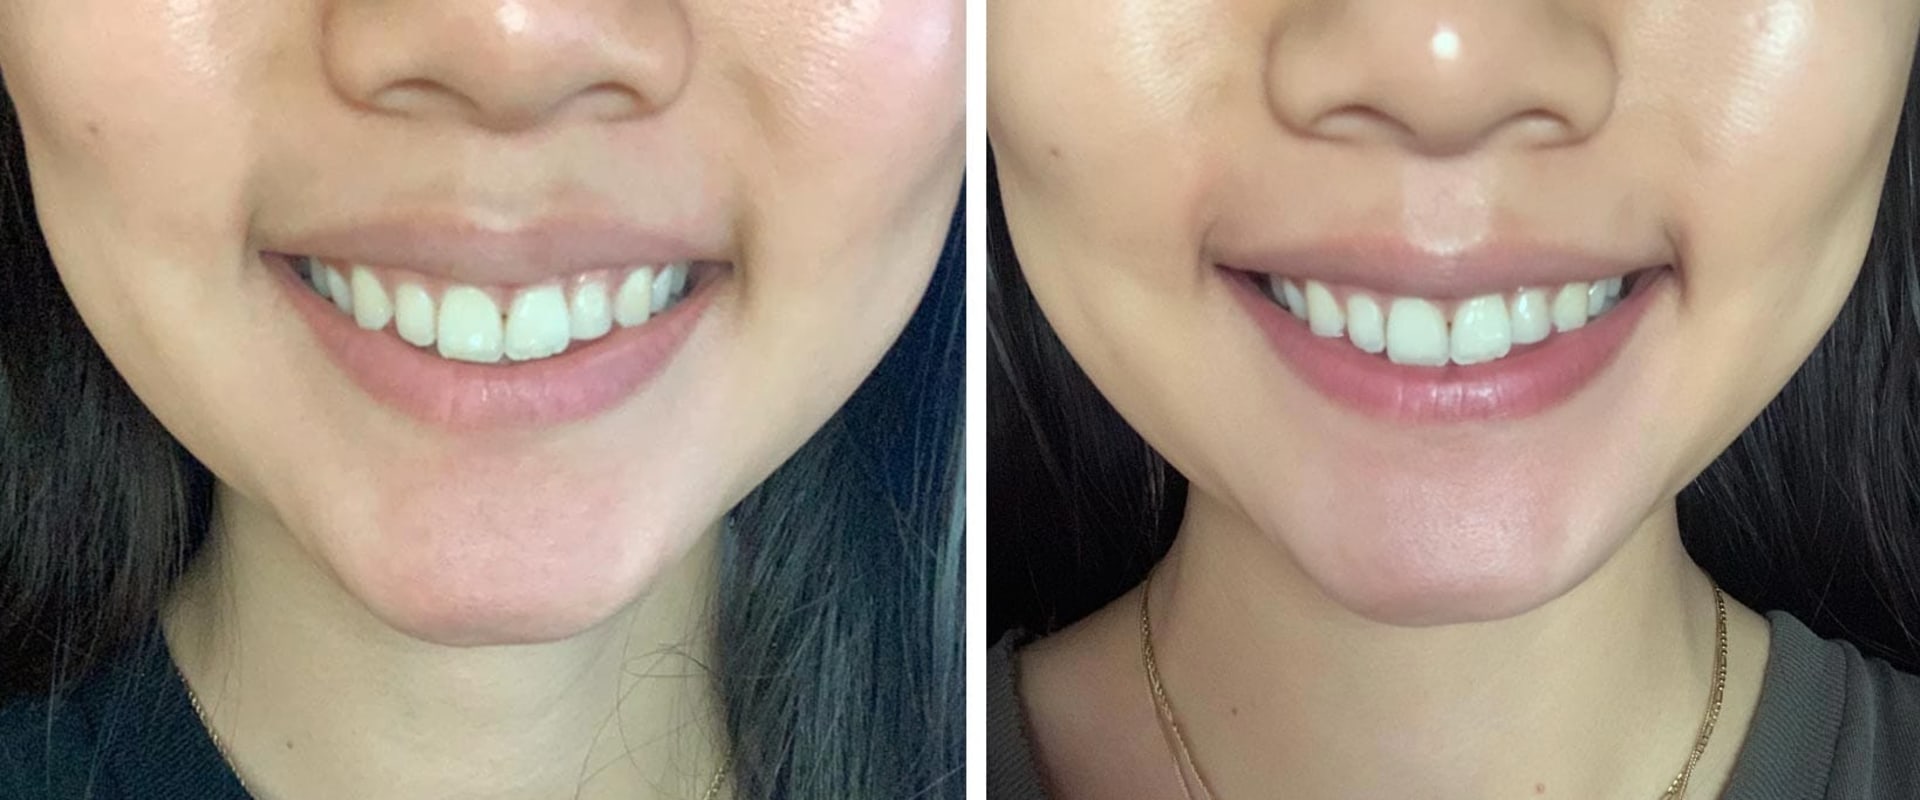 Teeth Whitening with Toothpaste and Mouthwash